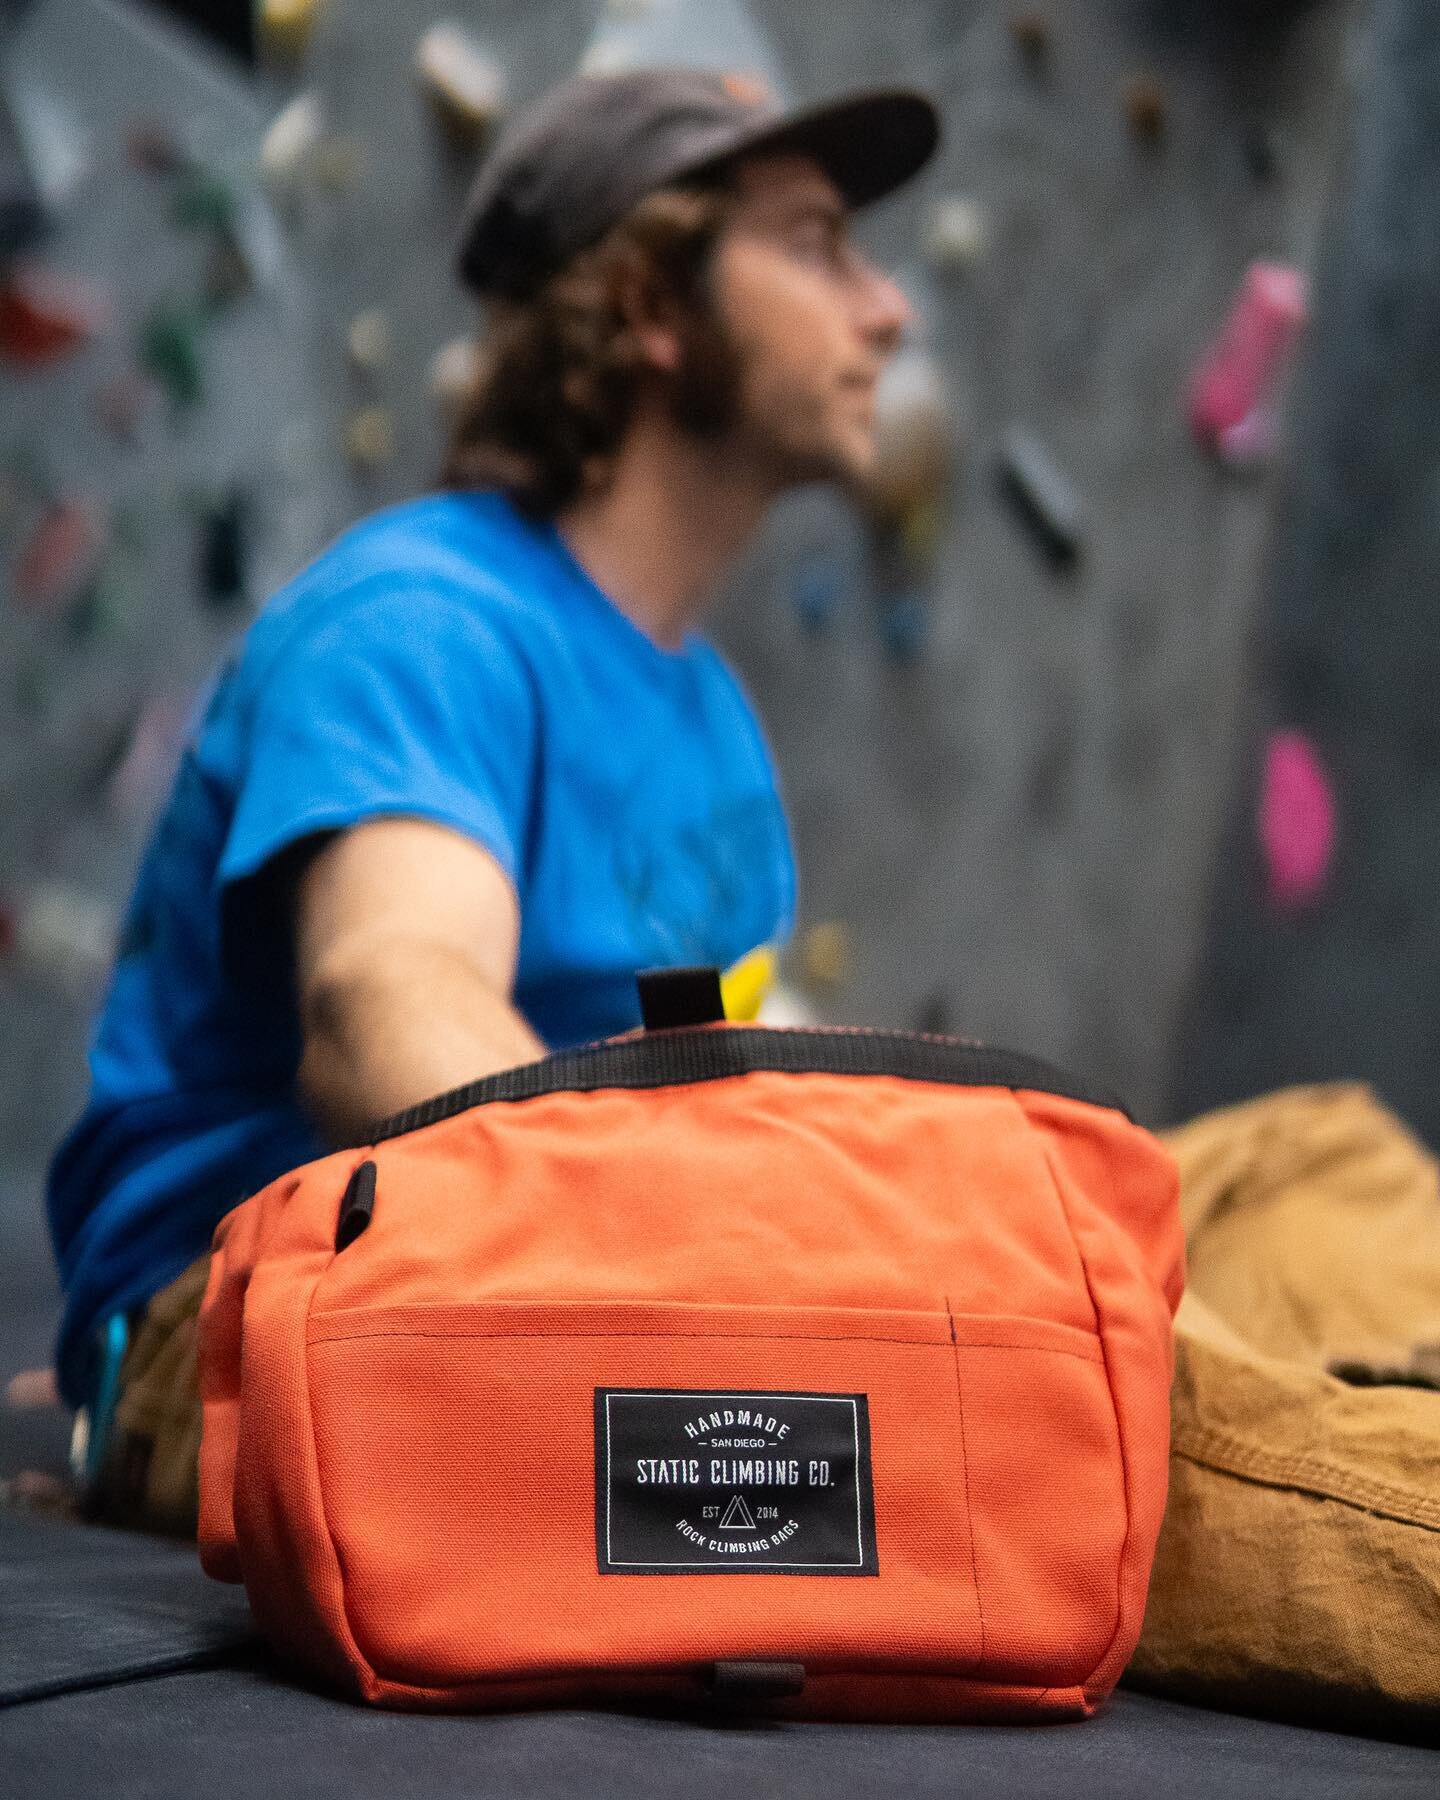 Another shoutout to our stellar CBTC sponsor and event vendor @staticclimbing for always serving our community and events with their awesome handmade products! Wether it's a chalk bag, chalk bucket, or duffle bag, Static has always got your covered! 